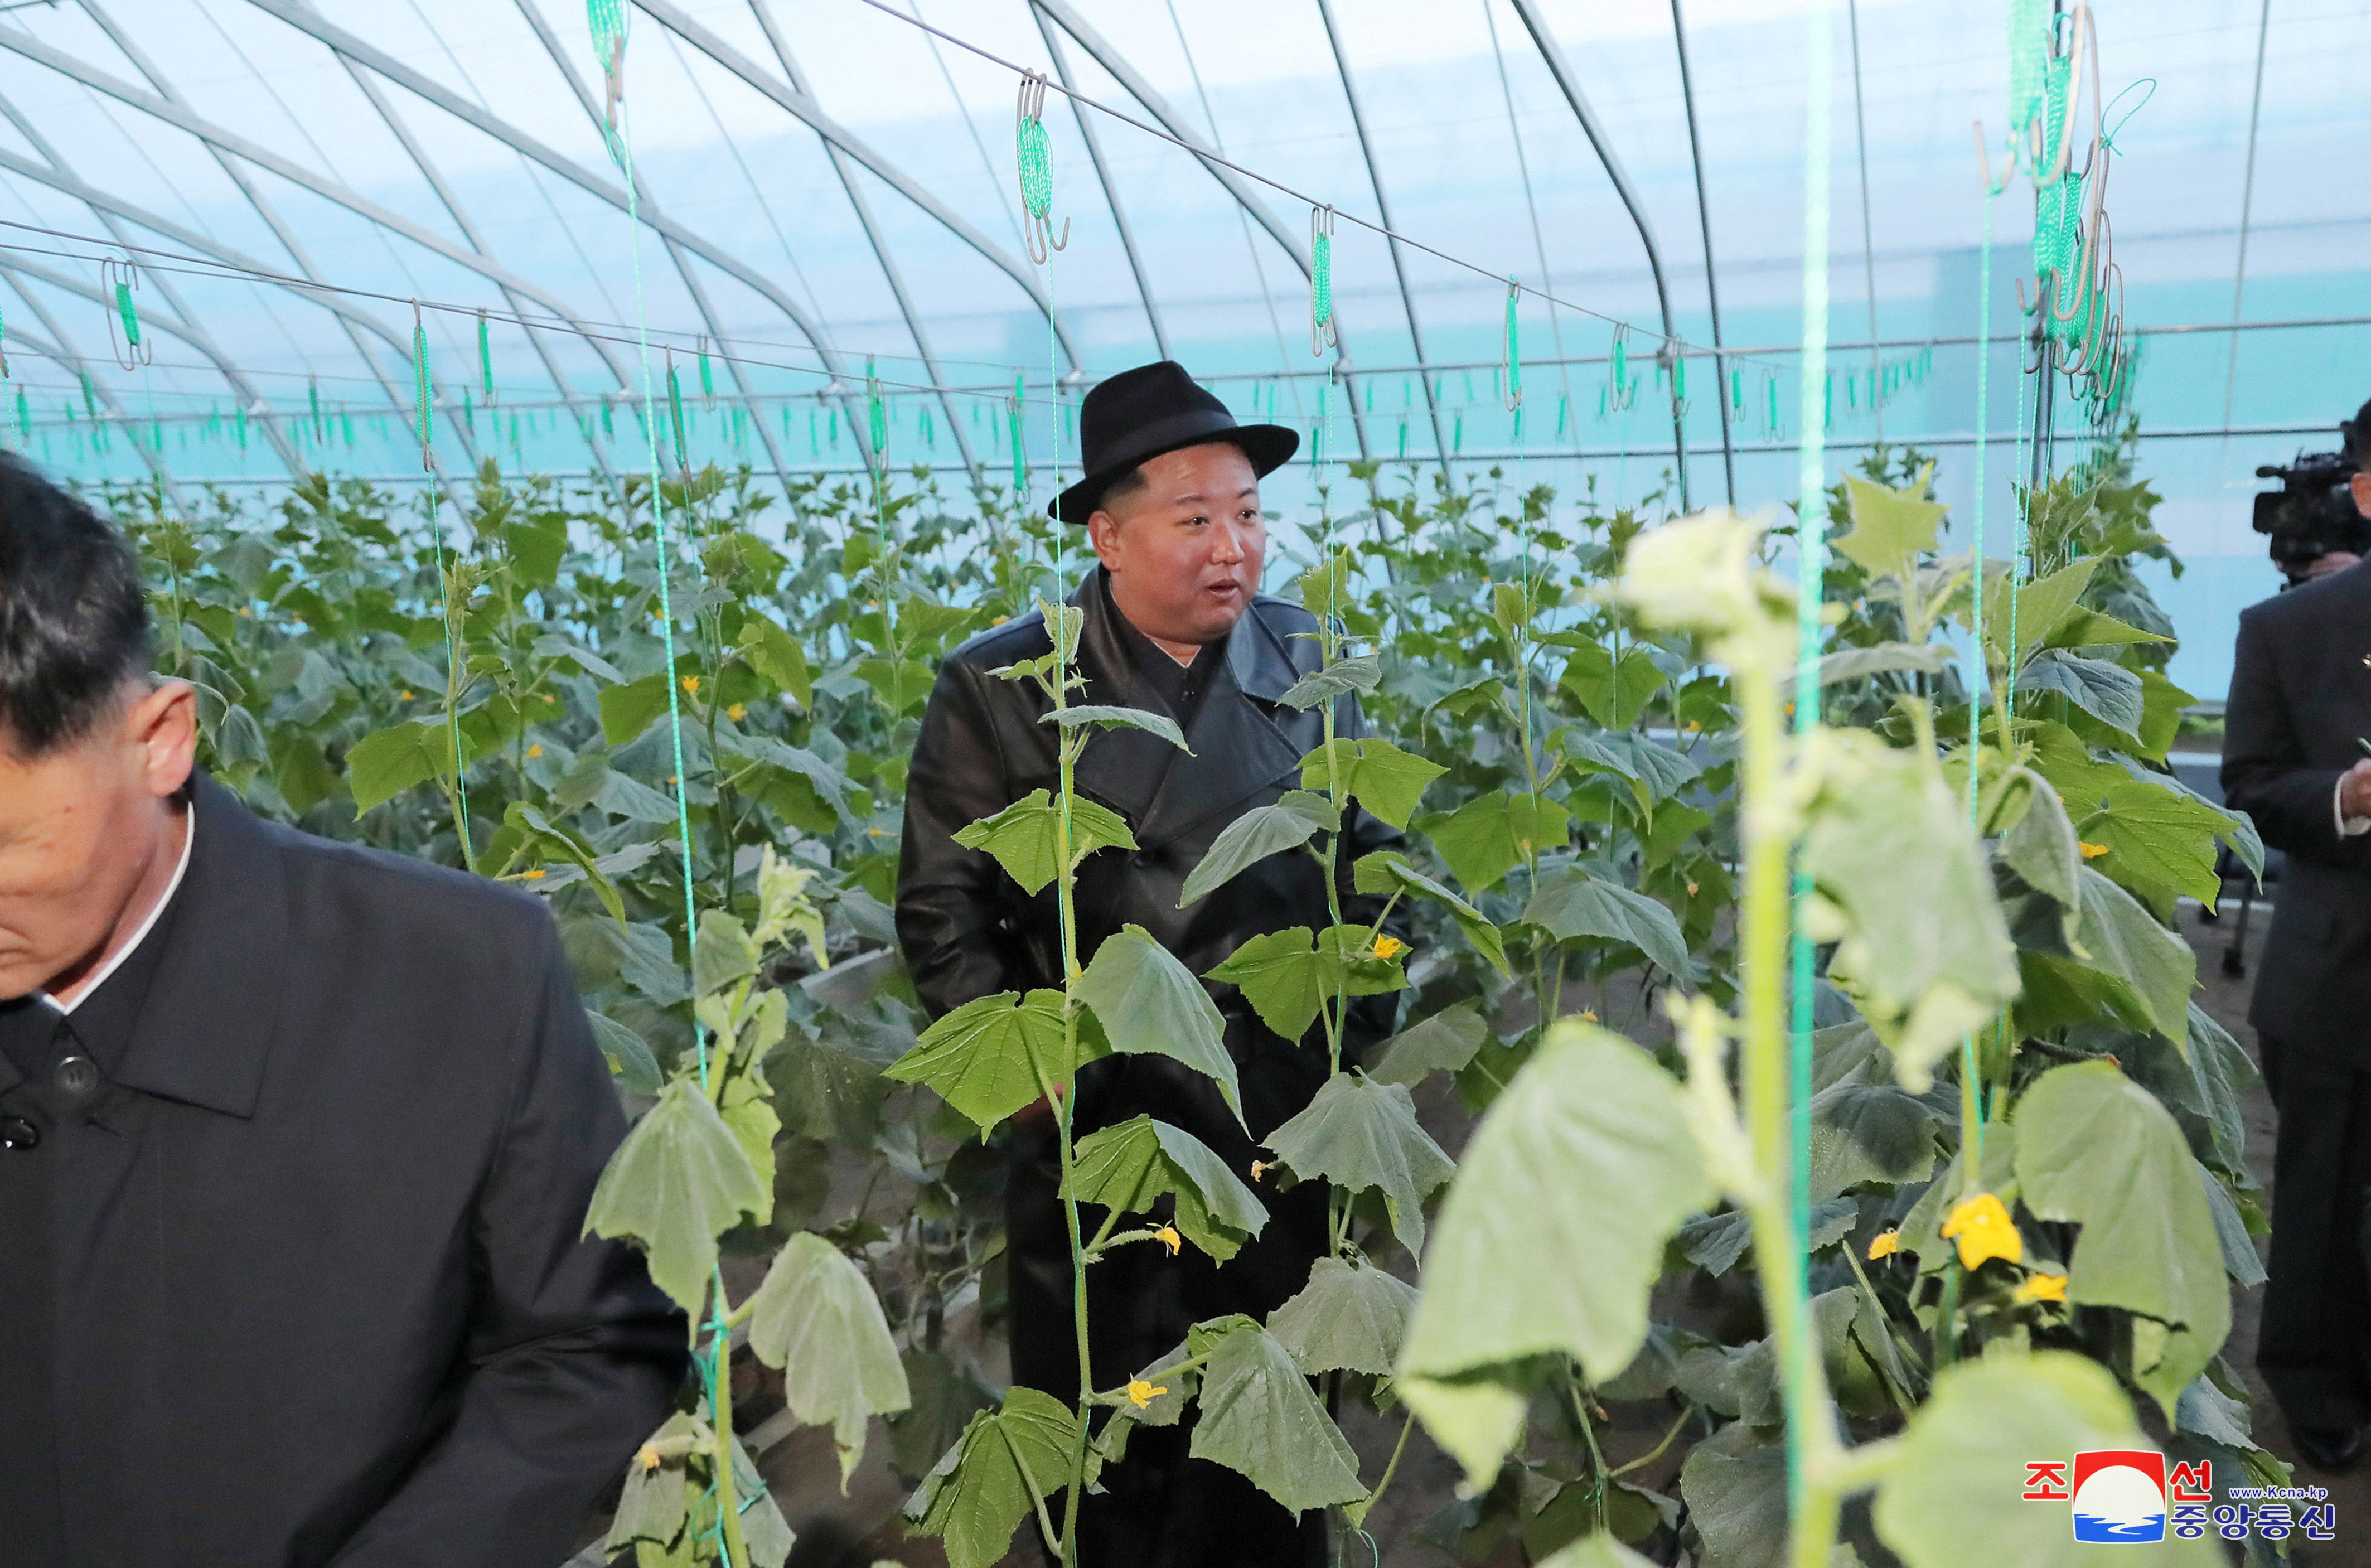 North Korea's leader Kim Jong Un attends the opening ceremony of the Ryonpho Greenhouse Farm